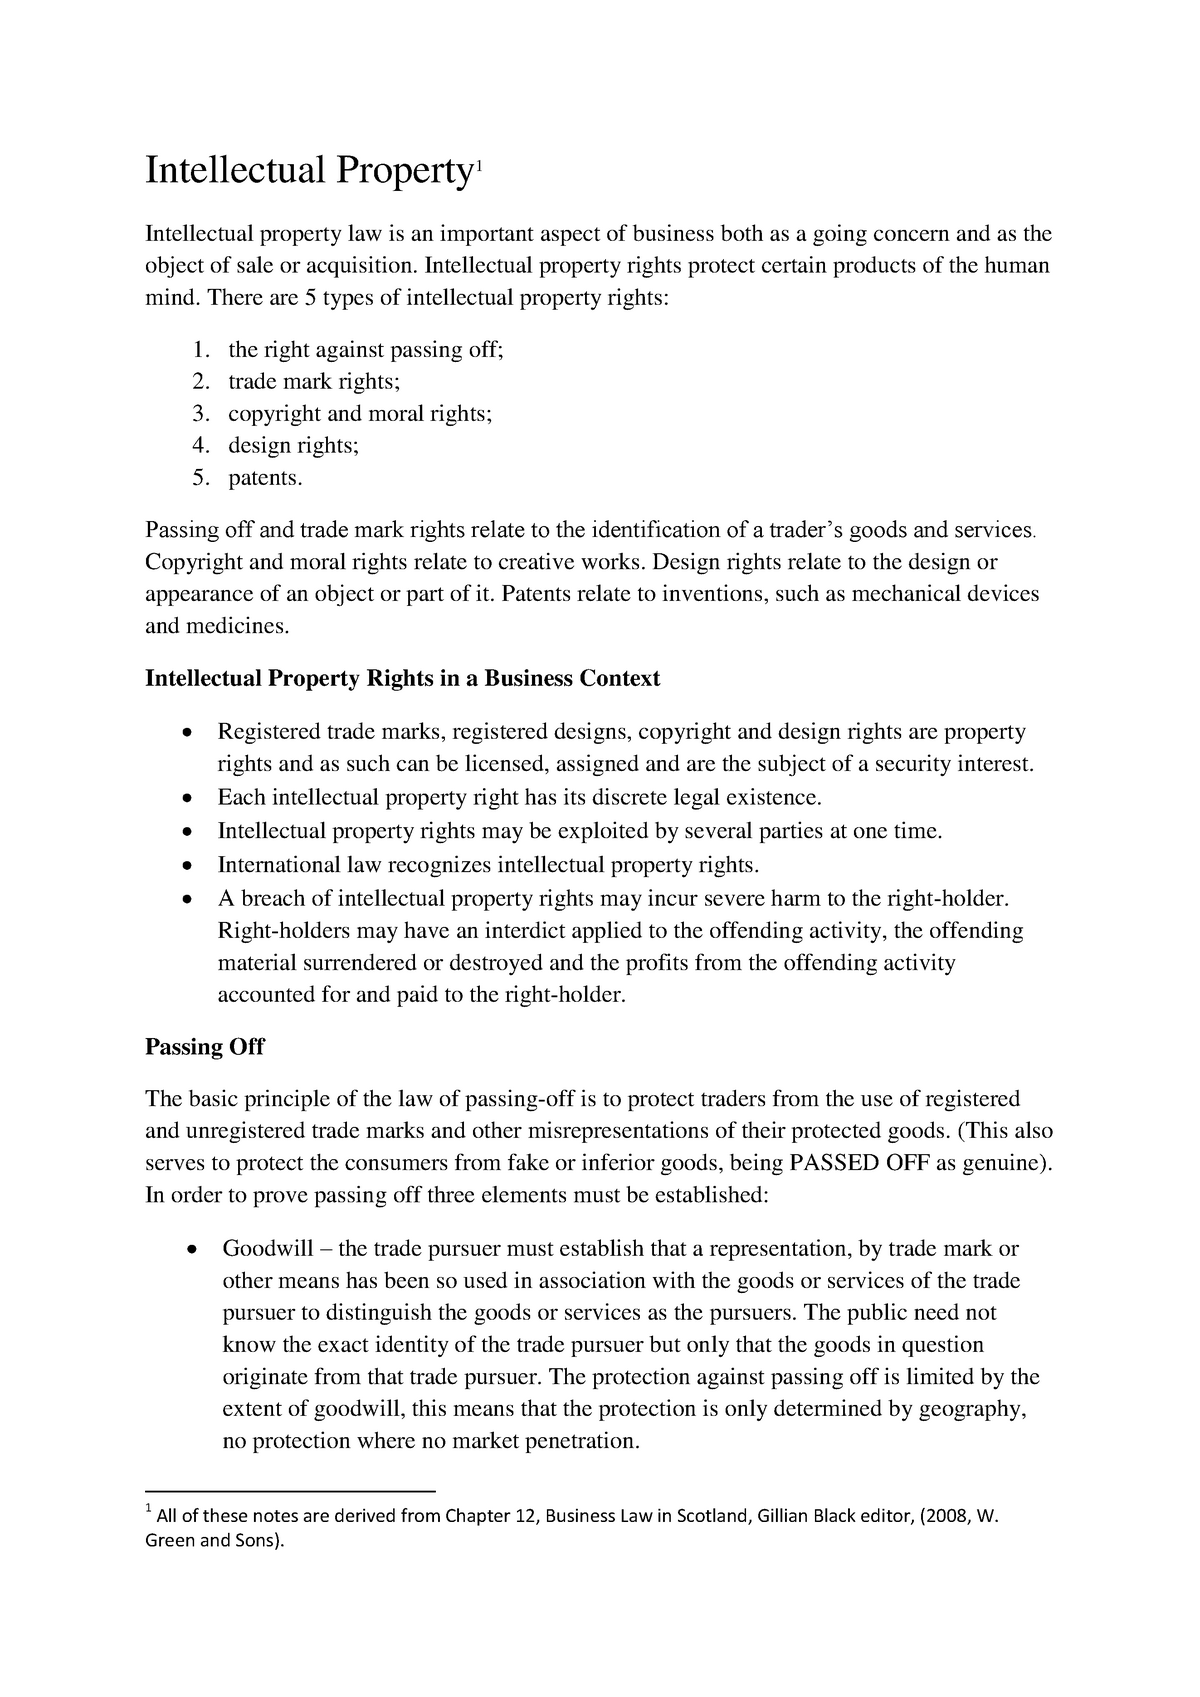 Intellectual Property Rights Notes - Intellectual Property 1 ...